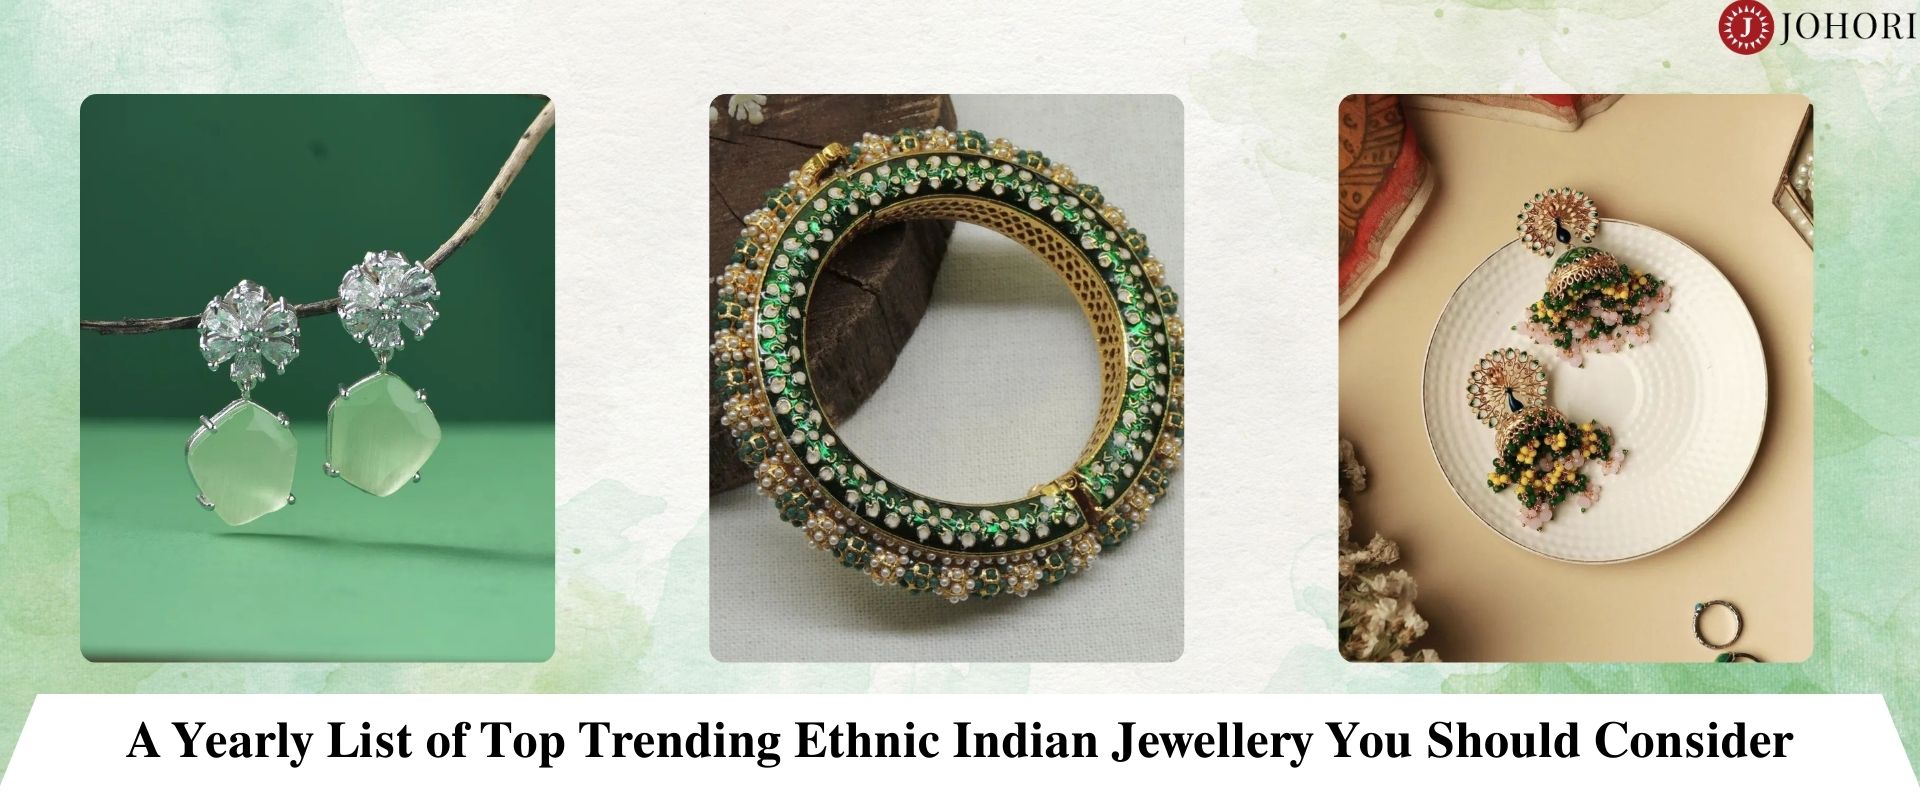 A Yearly List of Top Trending Ethnic Indian Jewellery You Should Consider